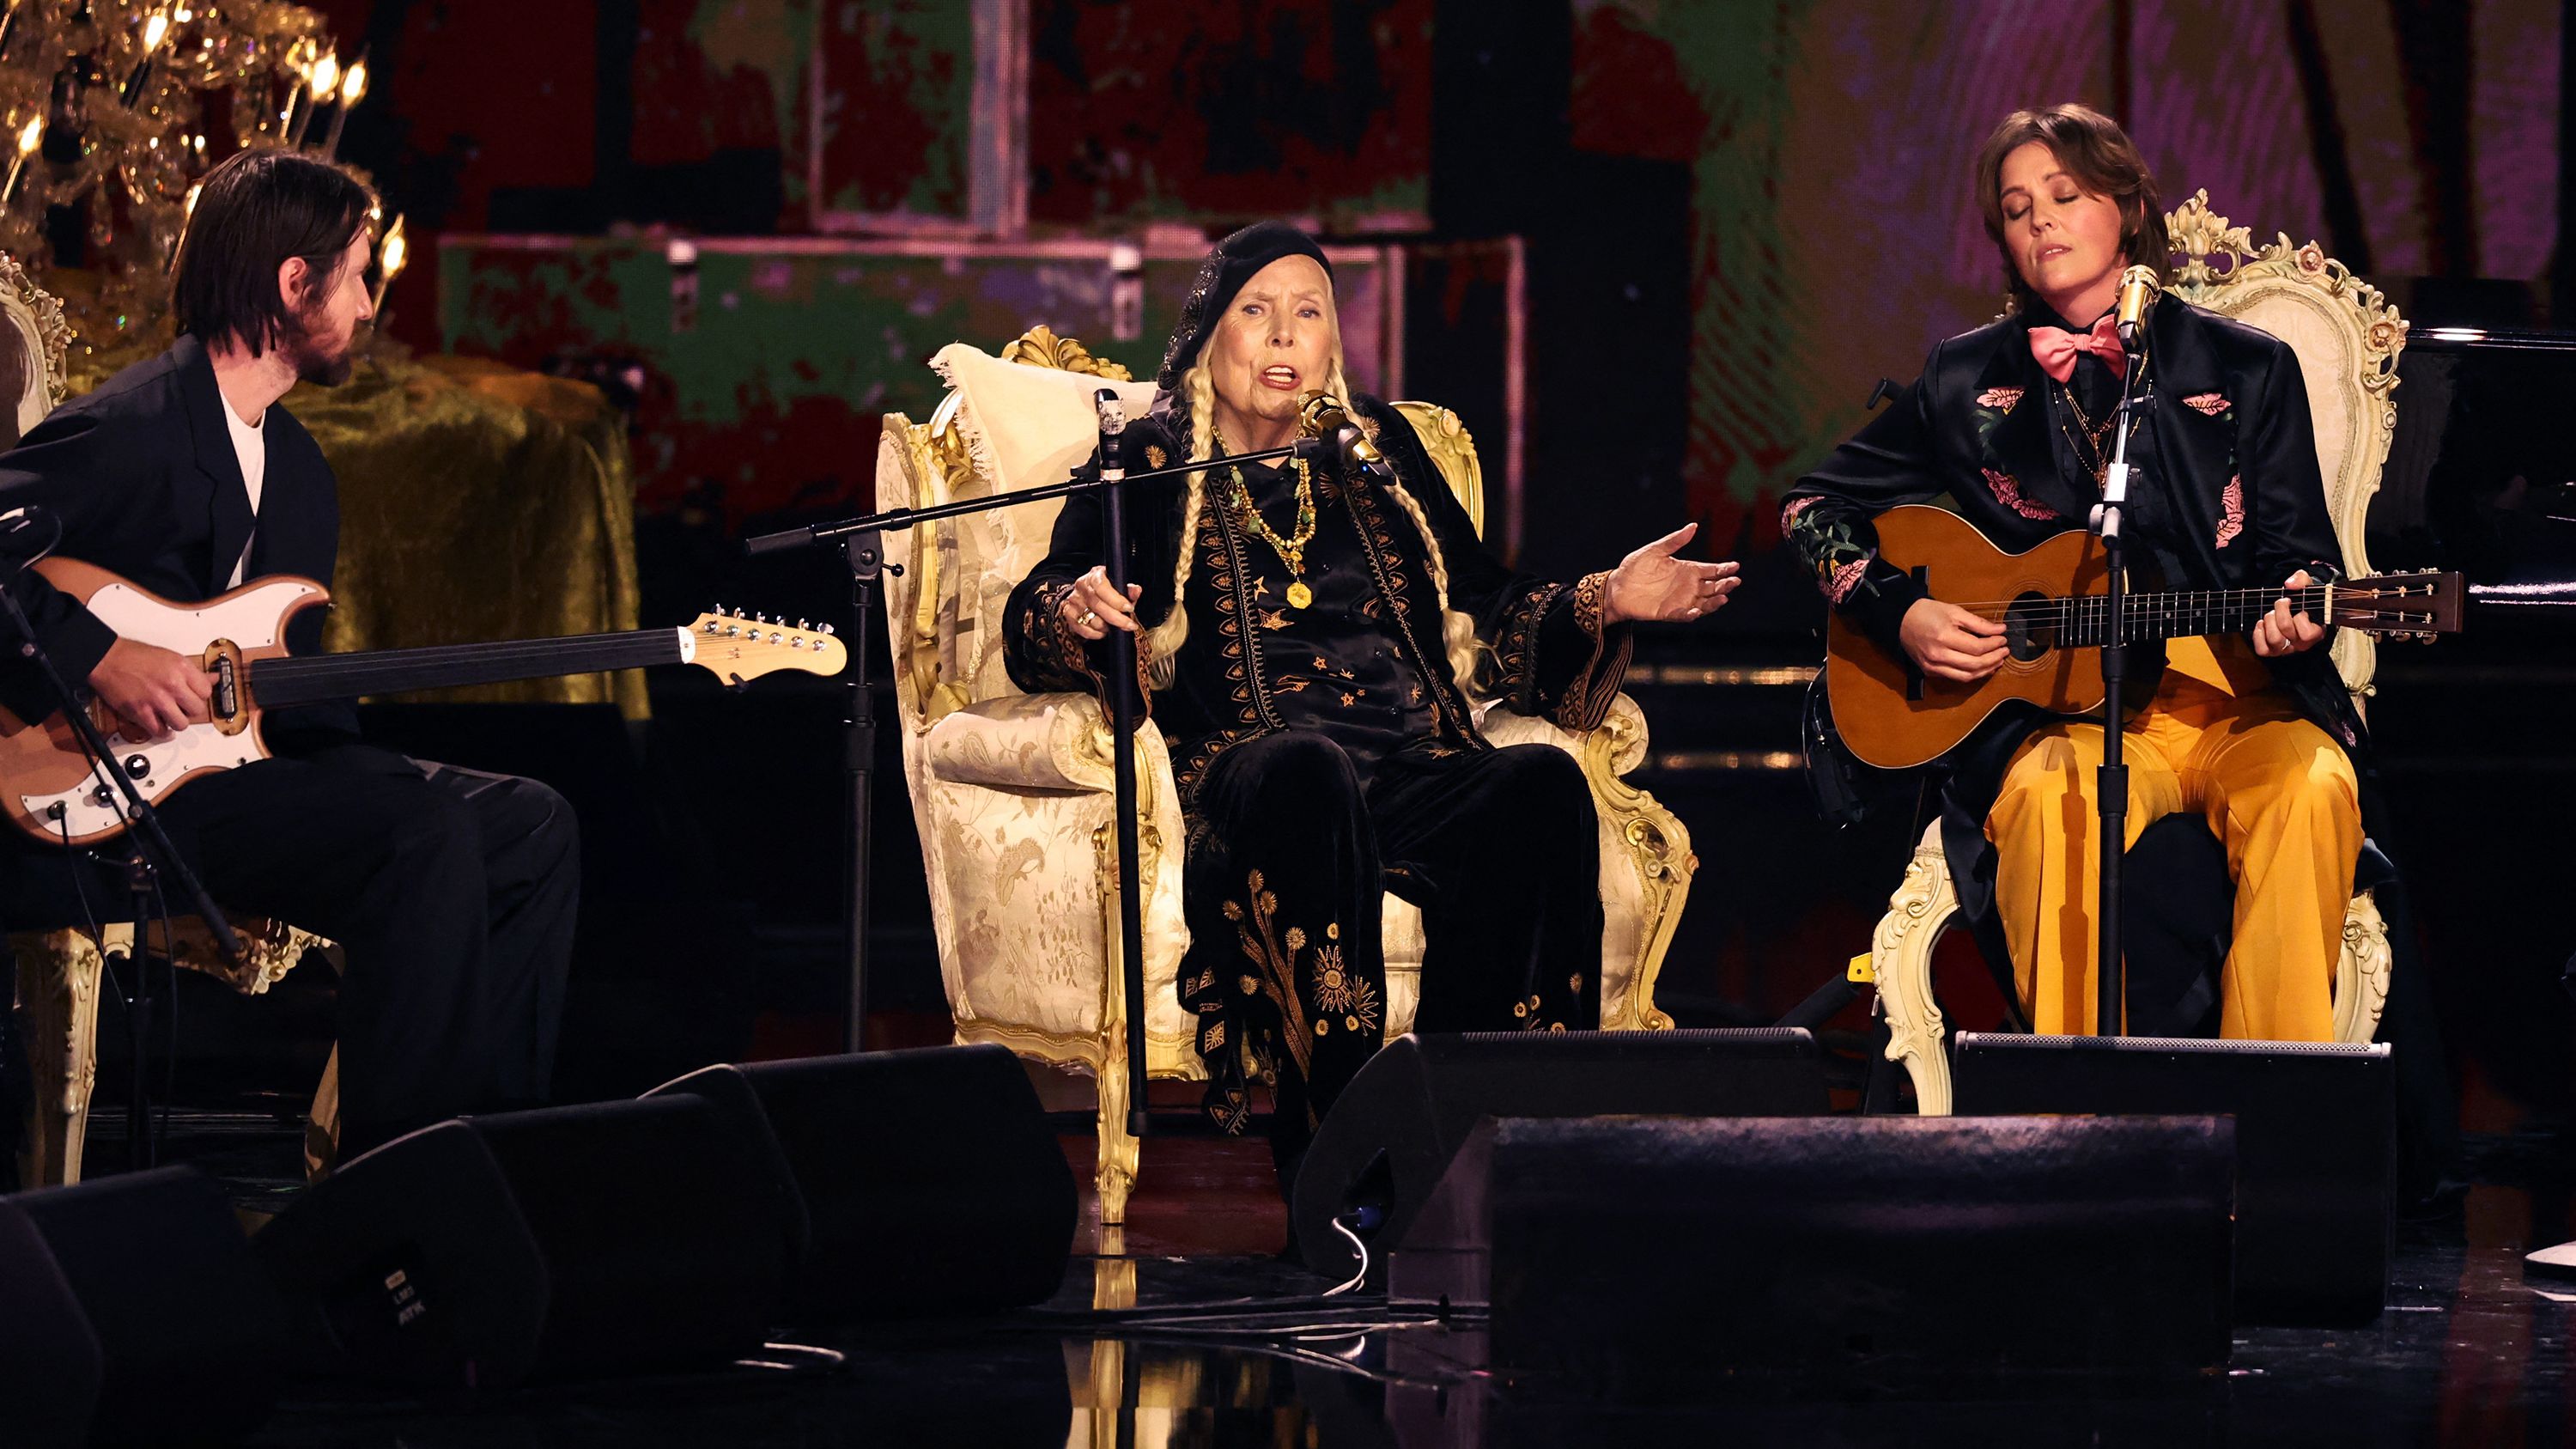 Joni Mitchell makes her Grammy performance debut at 80, with ‘Both